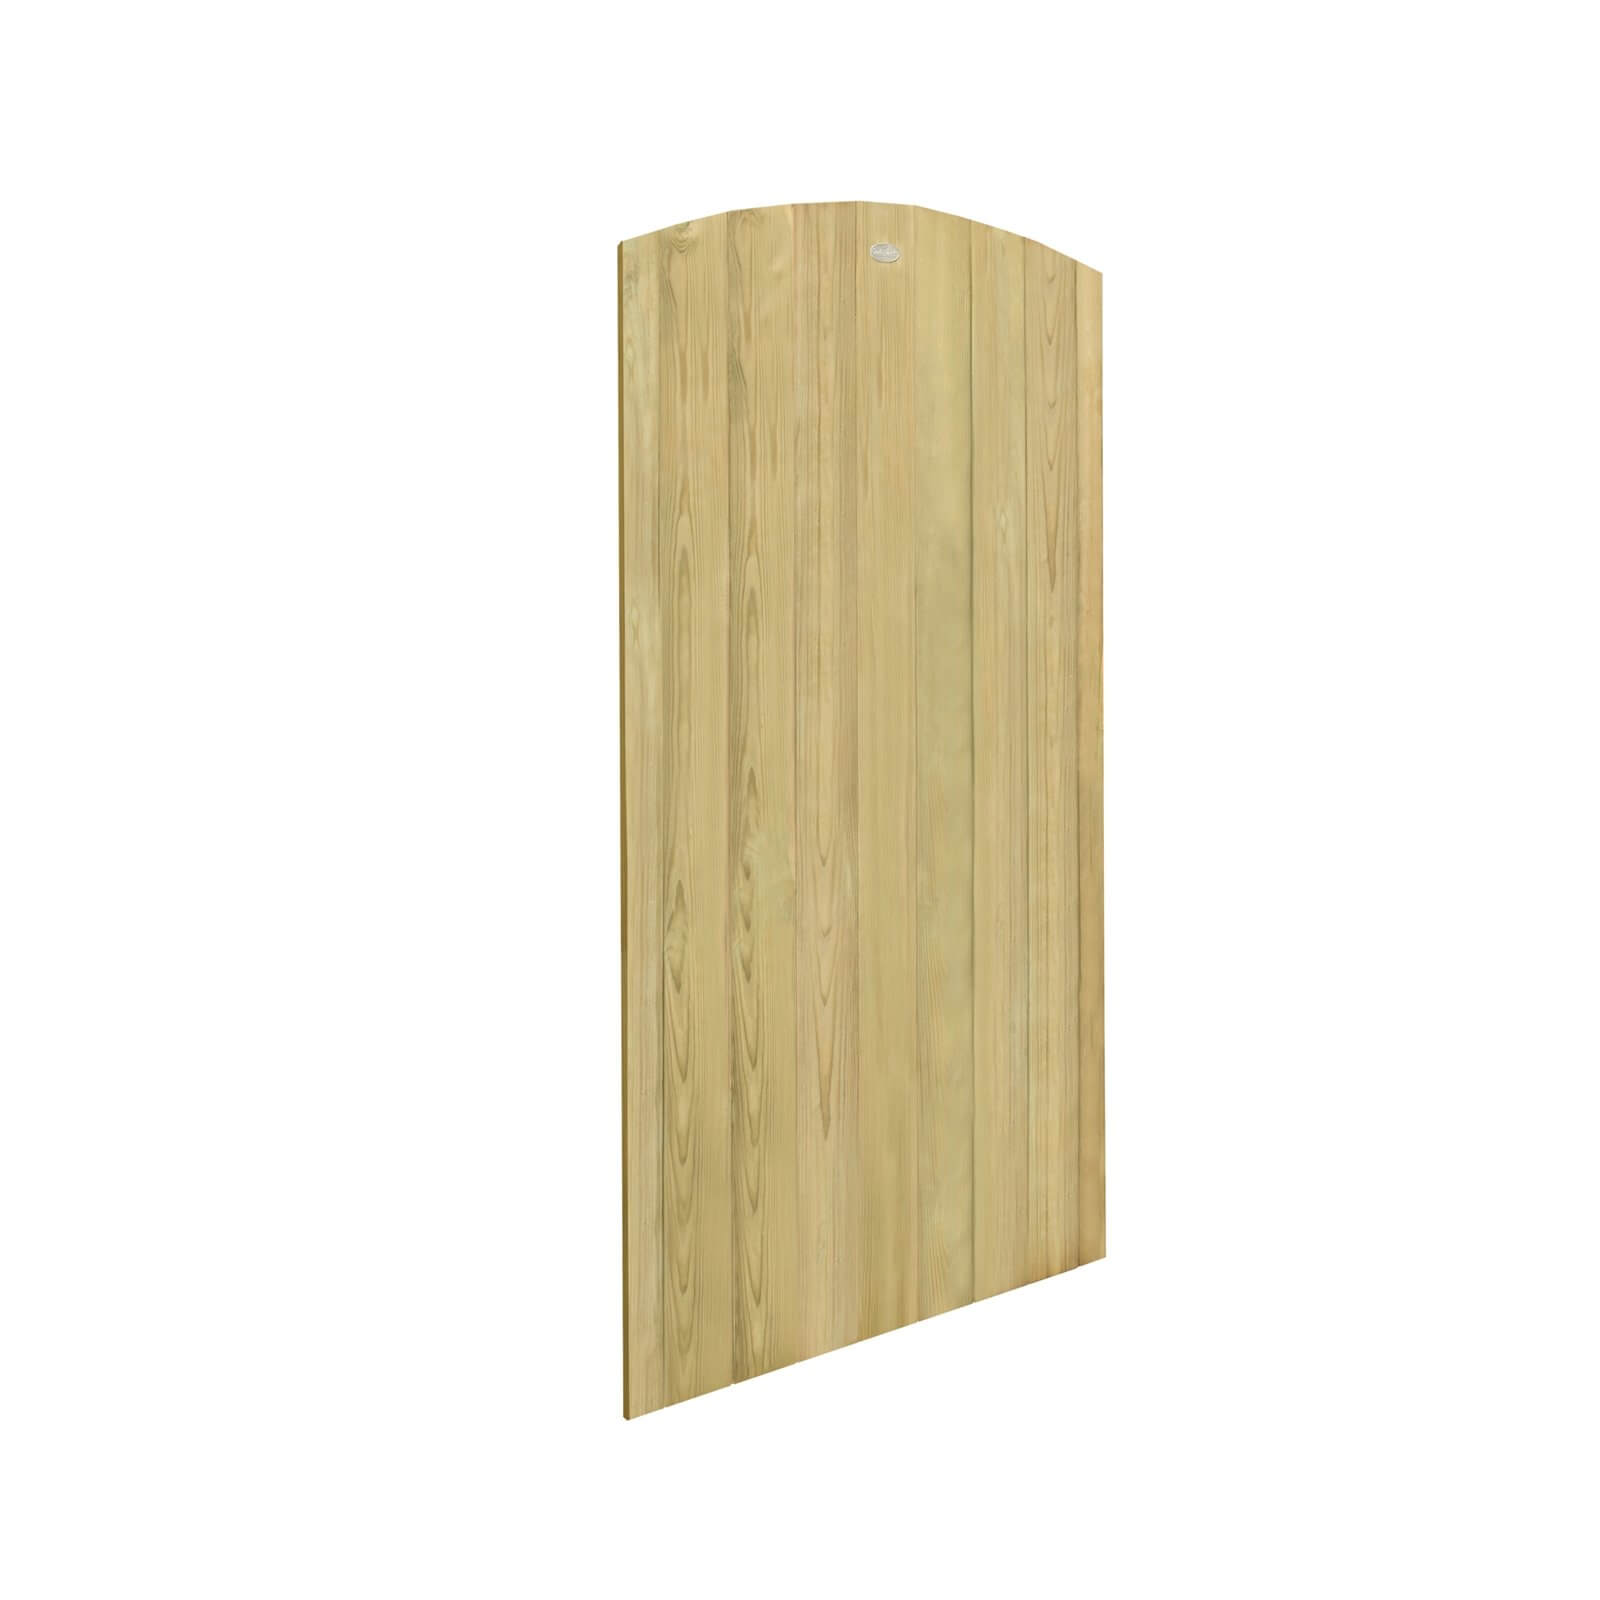 Dome Tongue & Groove Gate - 6ft